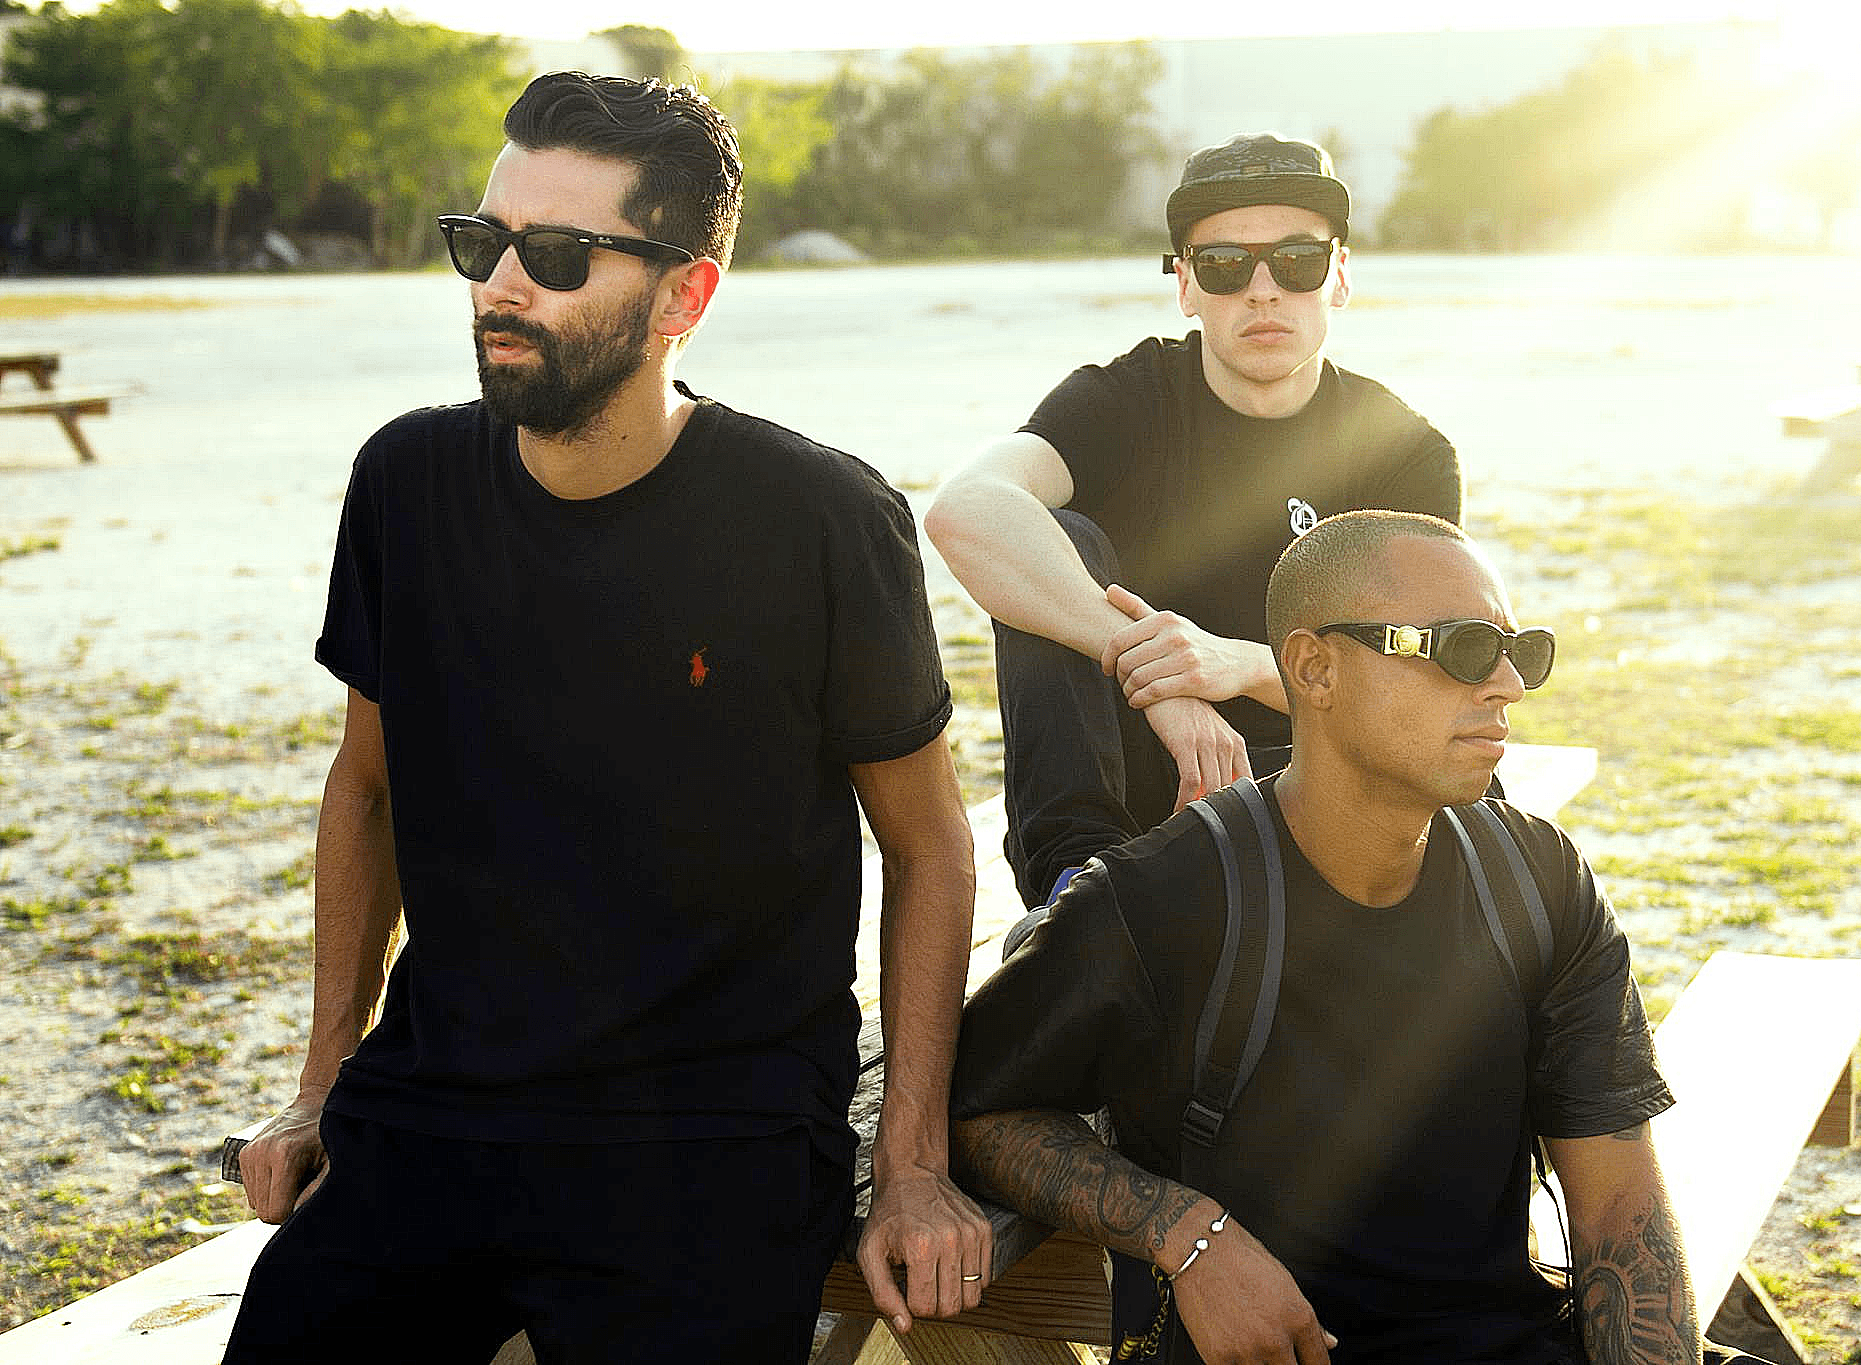 Yellow Claw Wallpaper Image Photo Picture Background